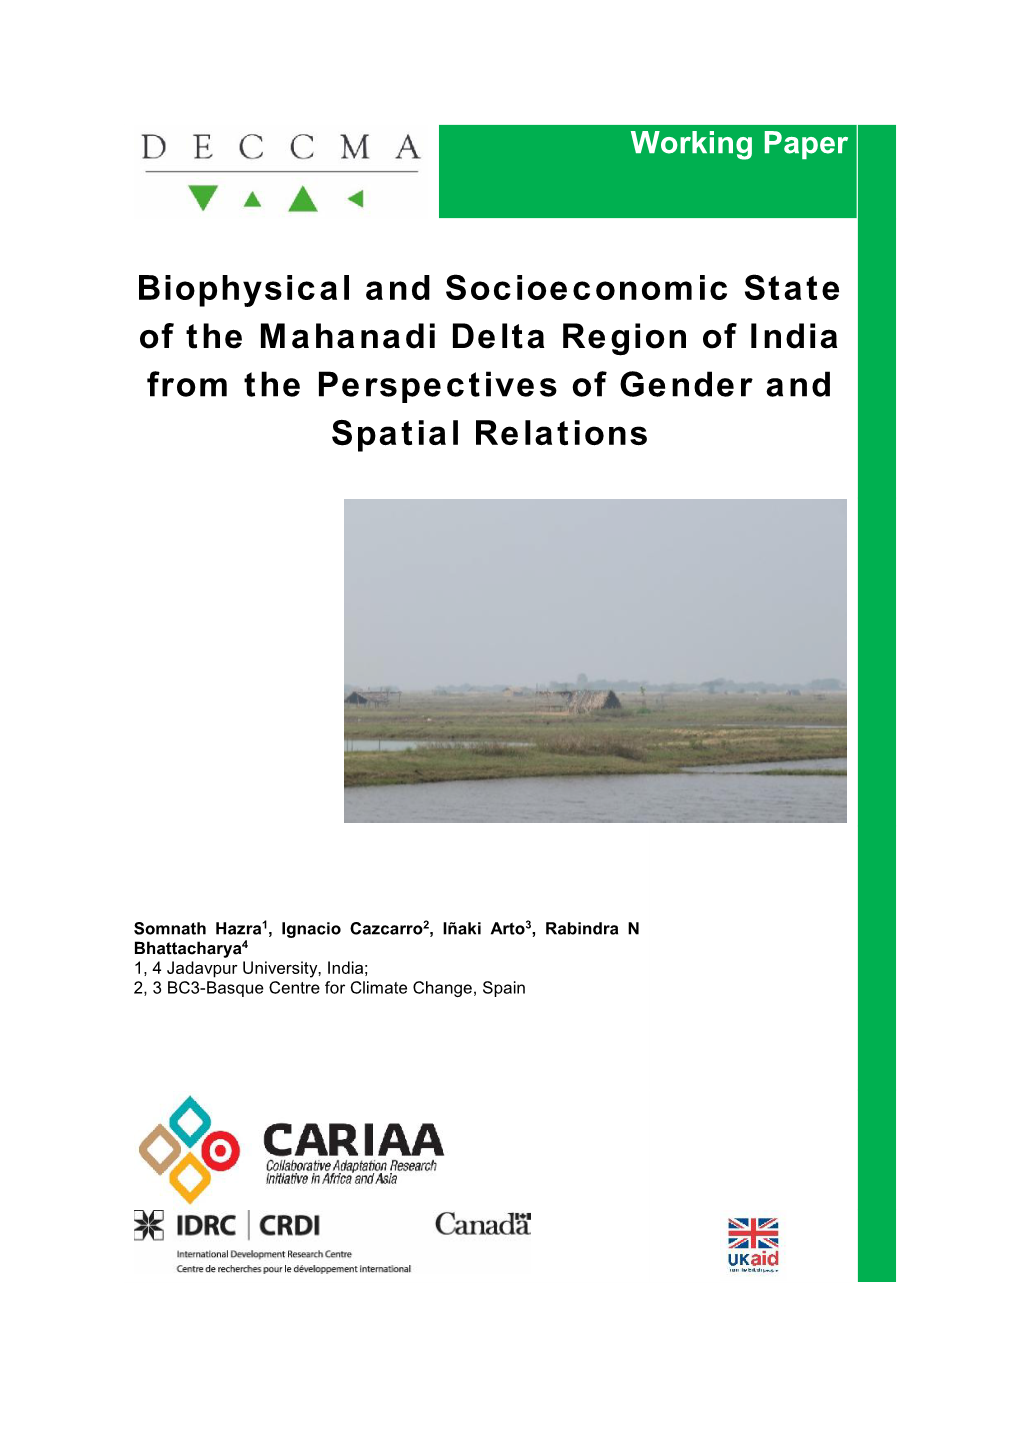 Biophysical and Socioeconomic State of the Mahanadi Delta Region of India from the Perspectives of Gender and Spatial Relations